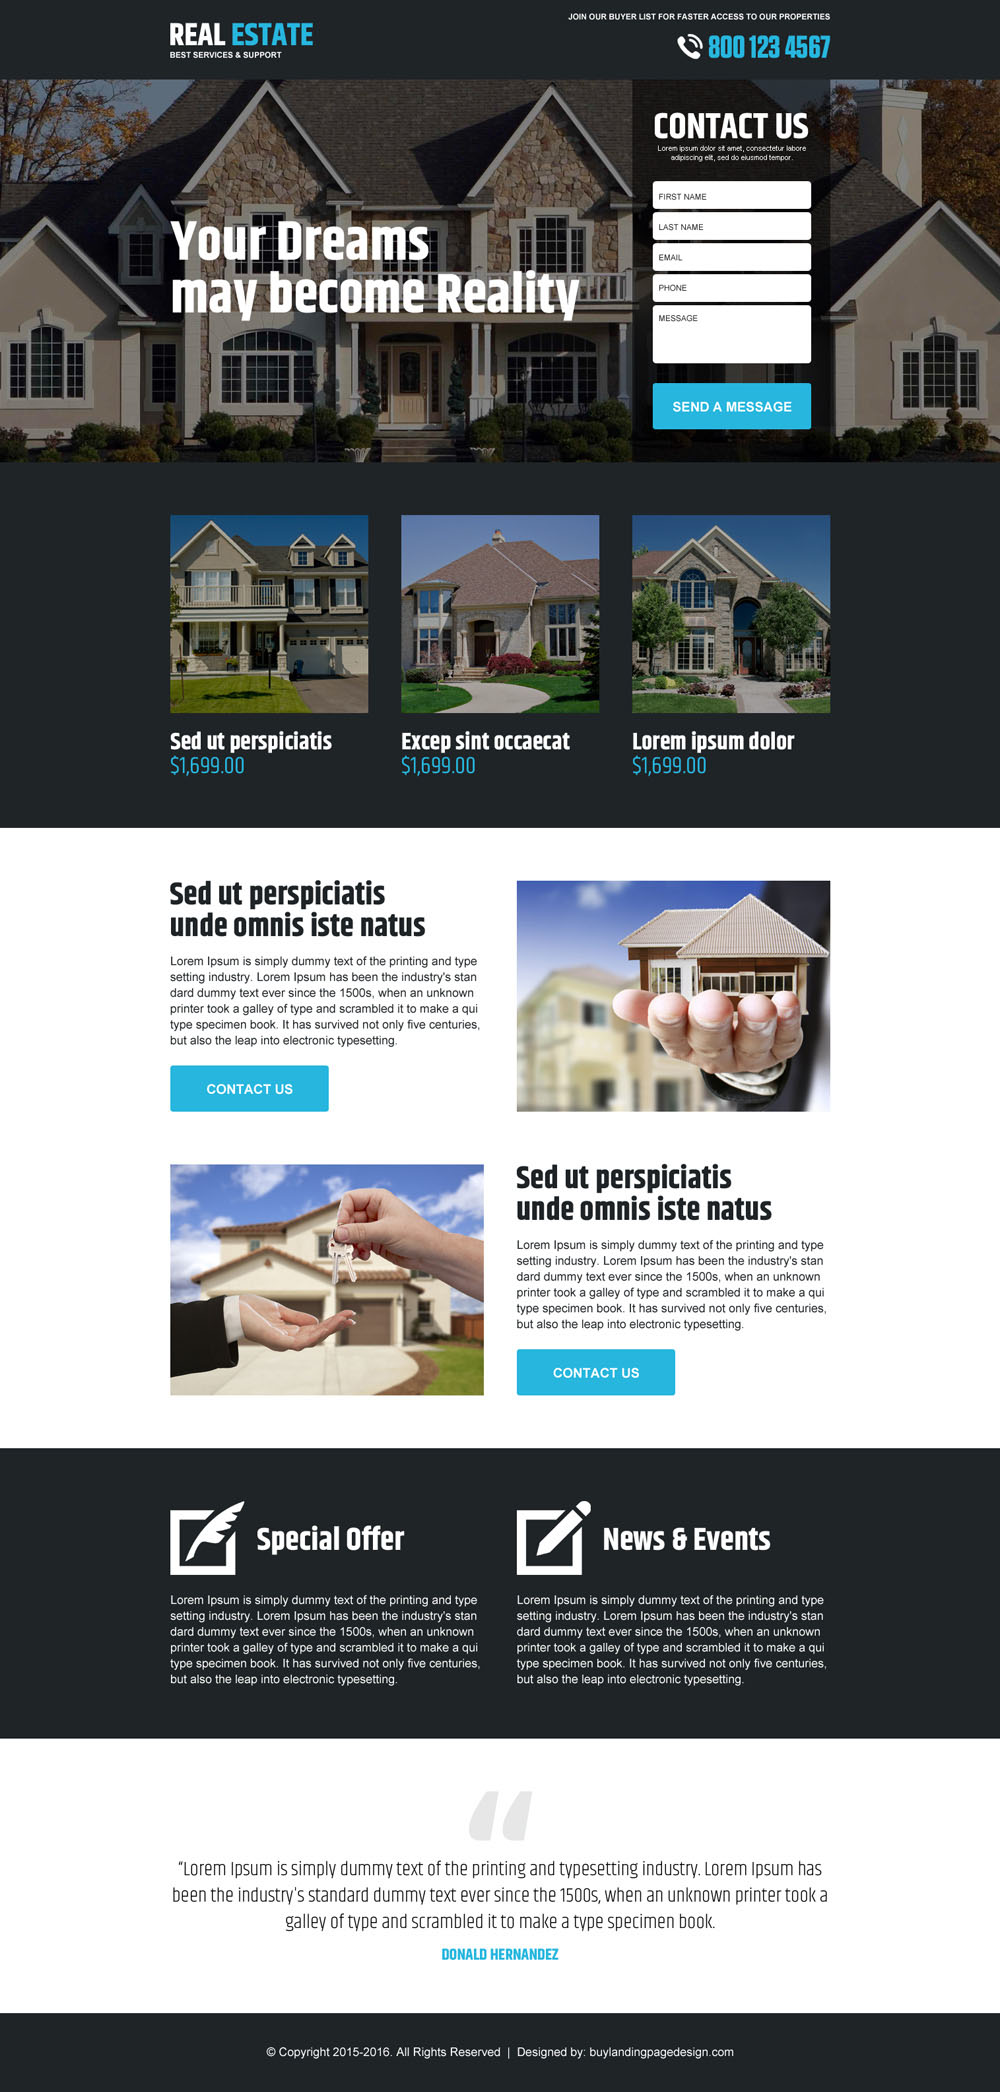 best-real-estate-service-and-support-lead-gen-converting-responsive-landing-page-design-010